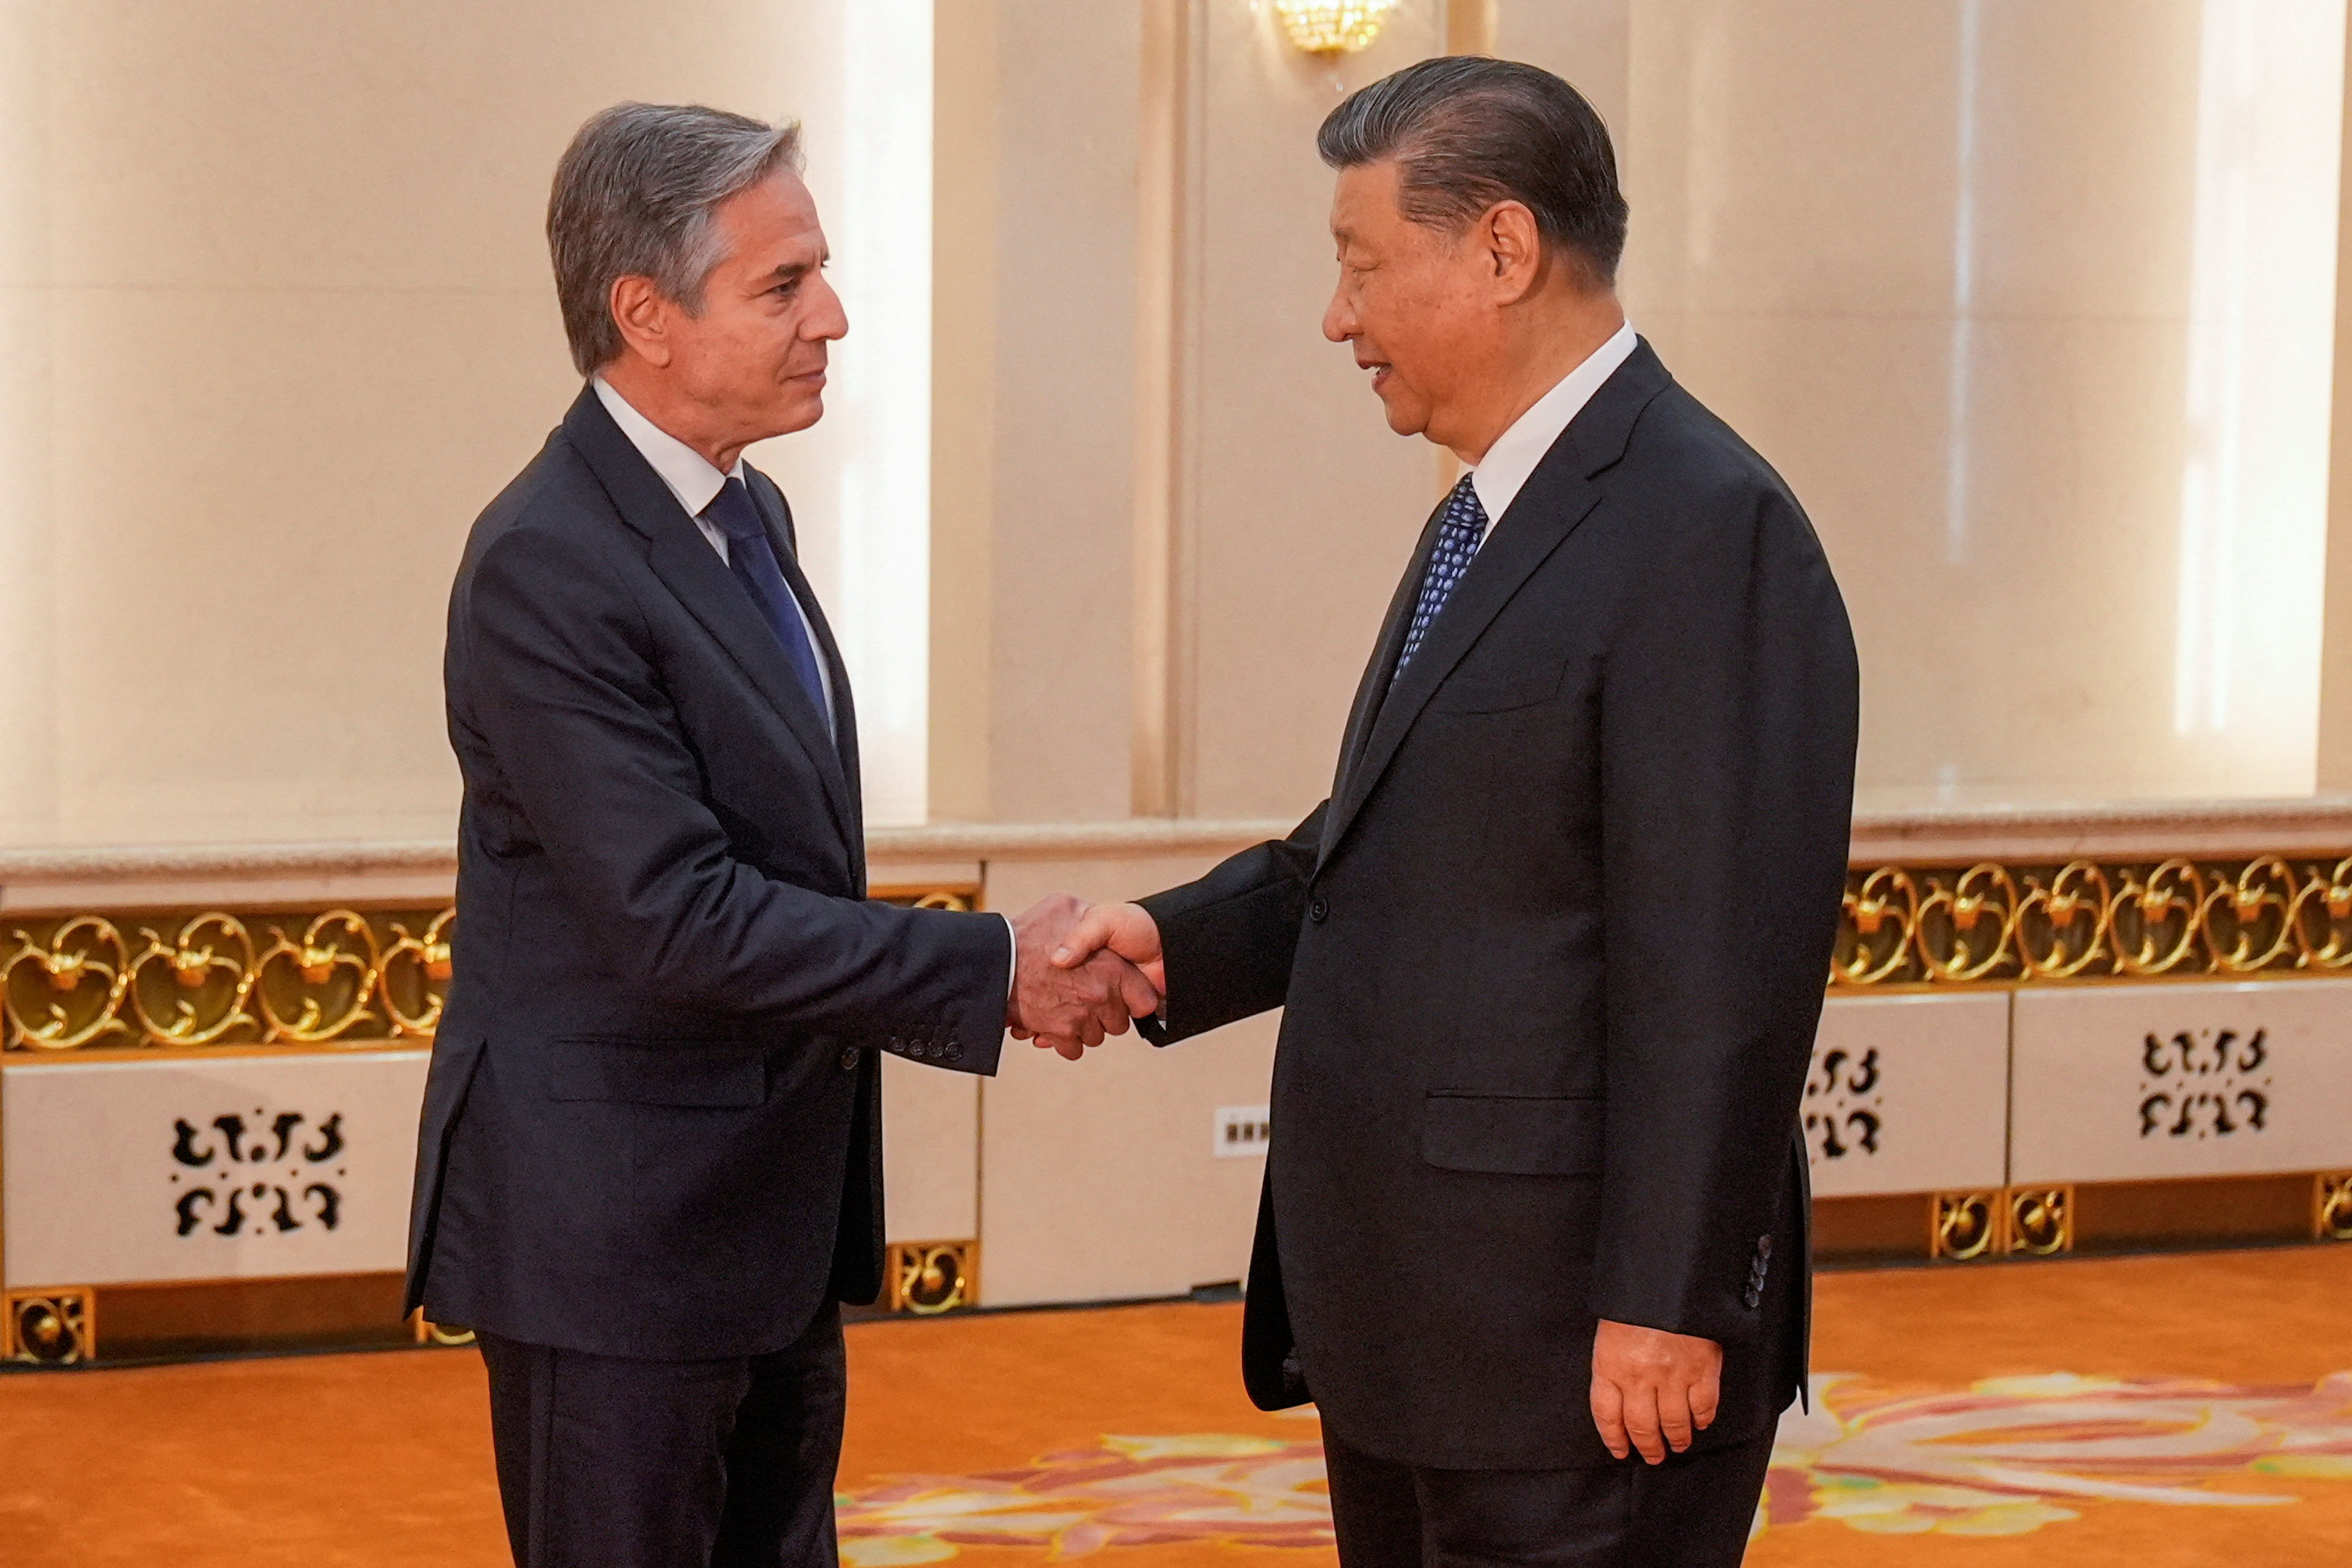 US Secretary of State Antony Blinken meets with Chinese President Xi Jinping at the Great Hall of the People in Beijing. Photo: Reuters